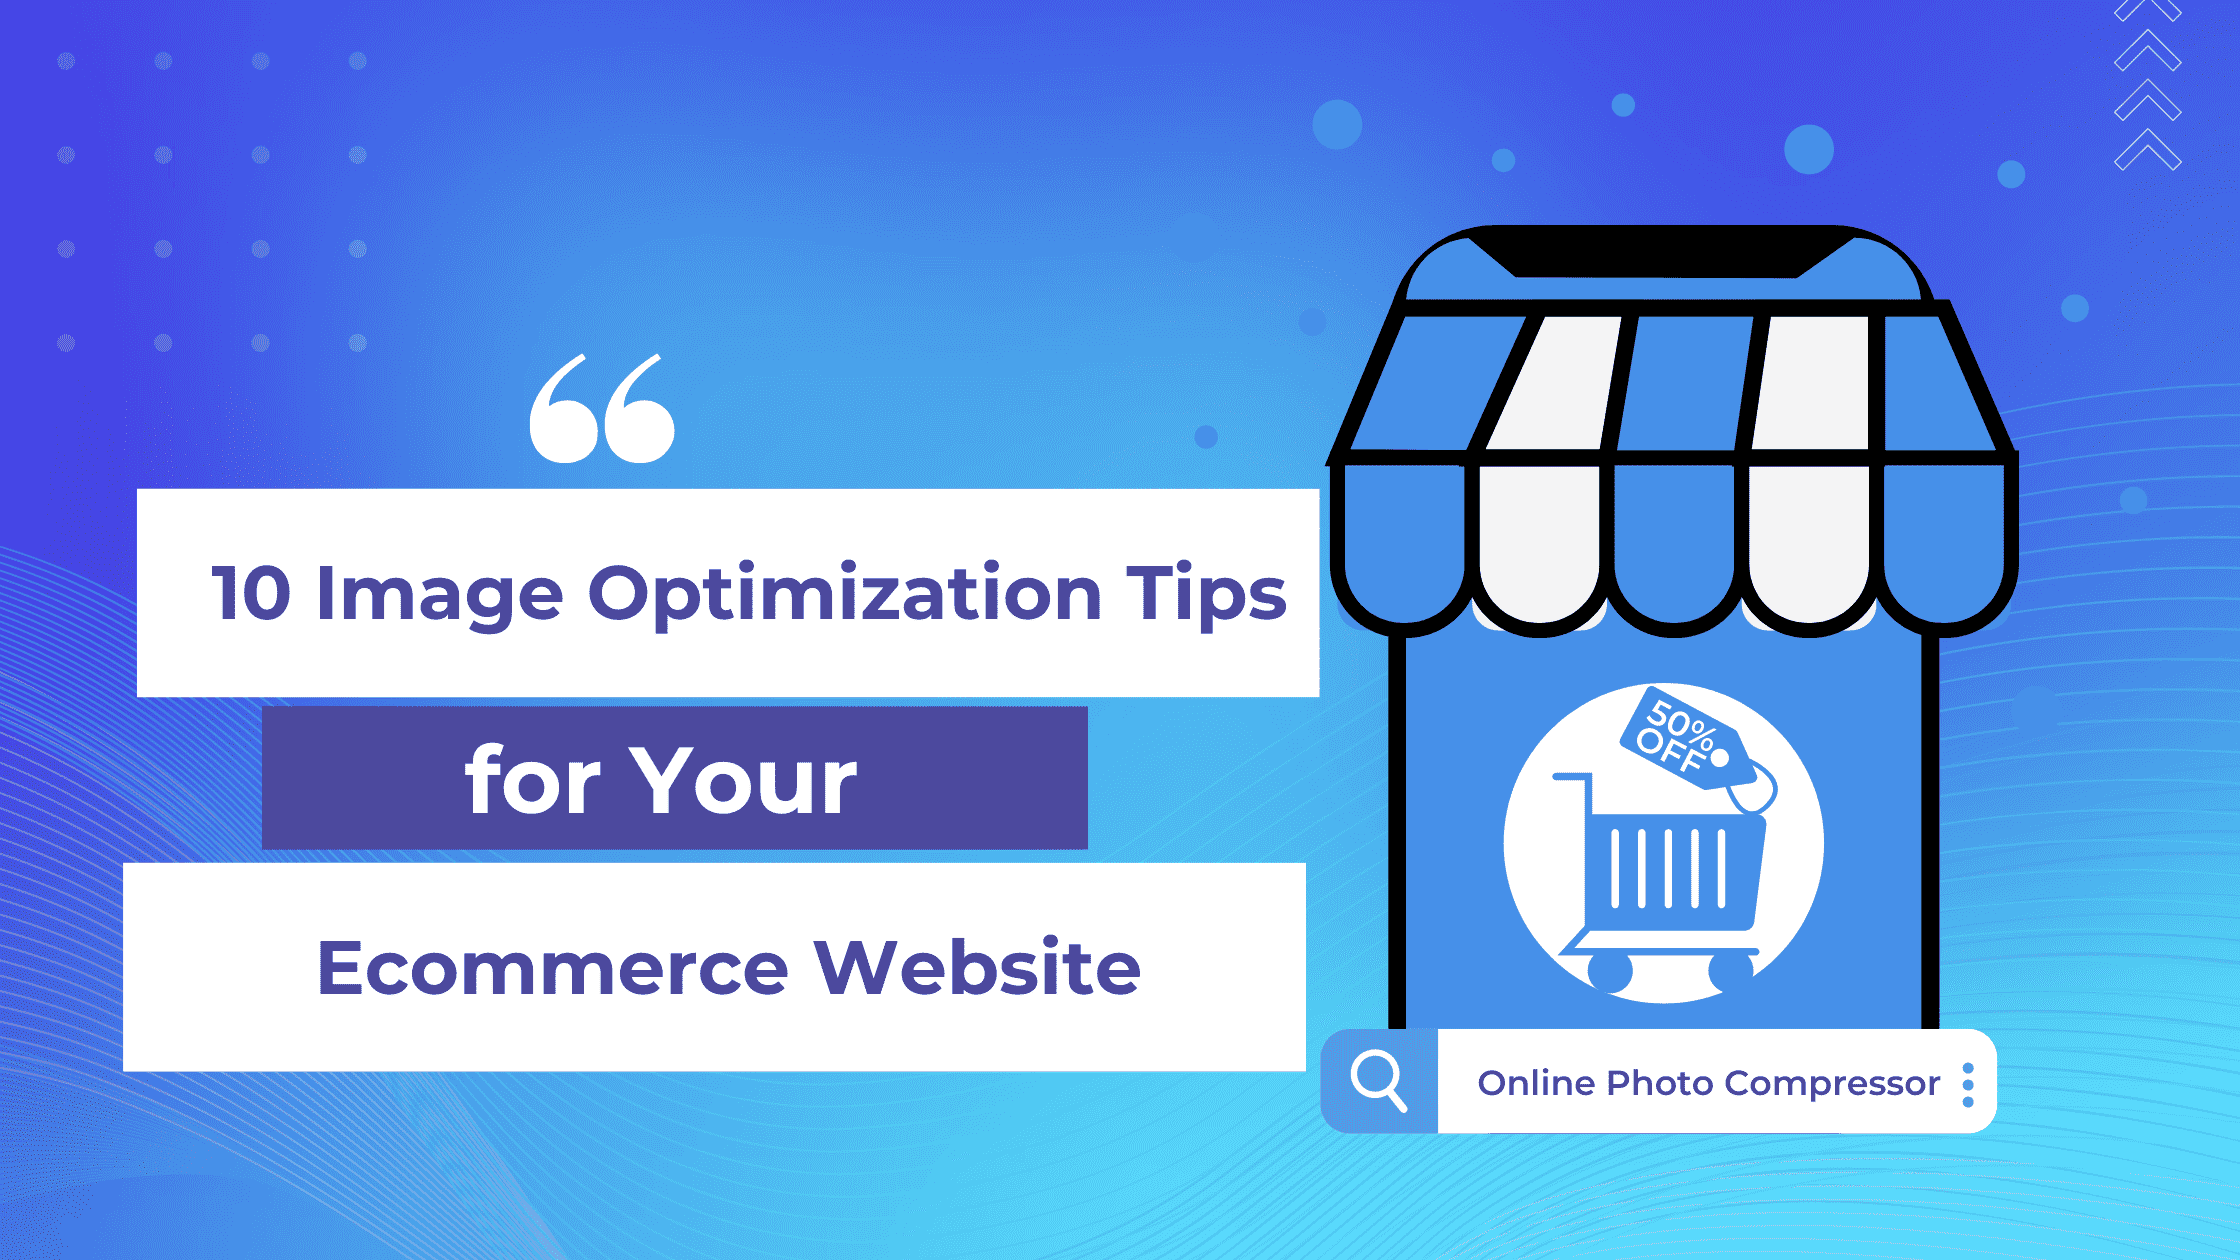 10 Image Optimization Tips for Your Ecommerce Website